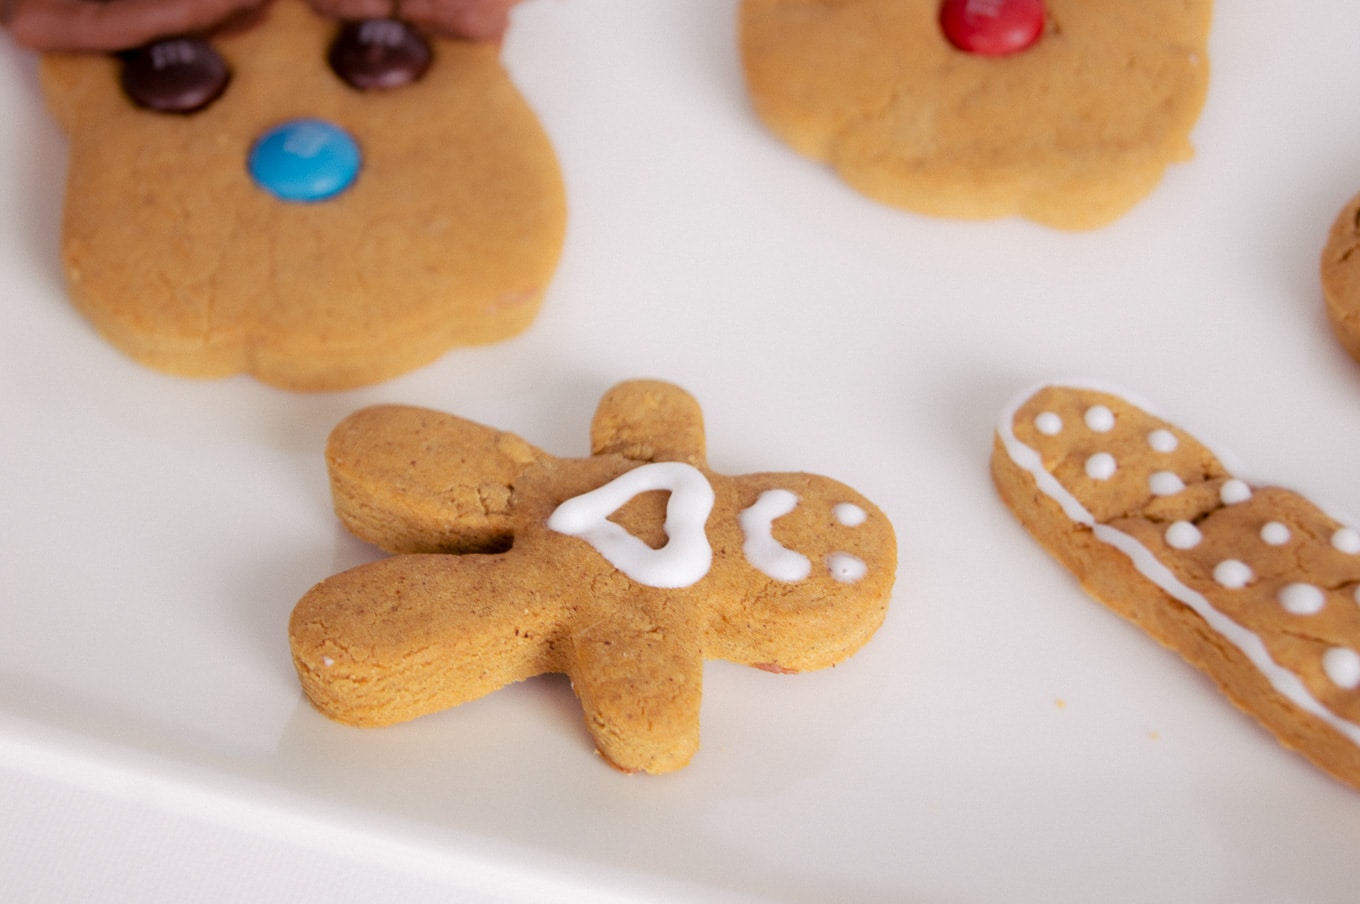 A cute gingerbread man with a smile and a heart on his chest lying between other decorated gingerbread cookies on a white plate.